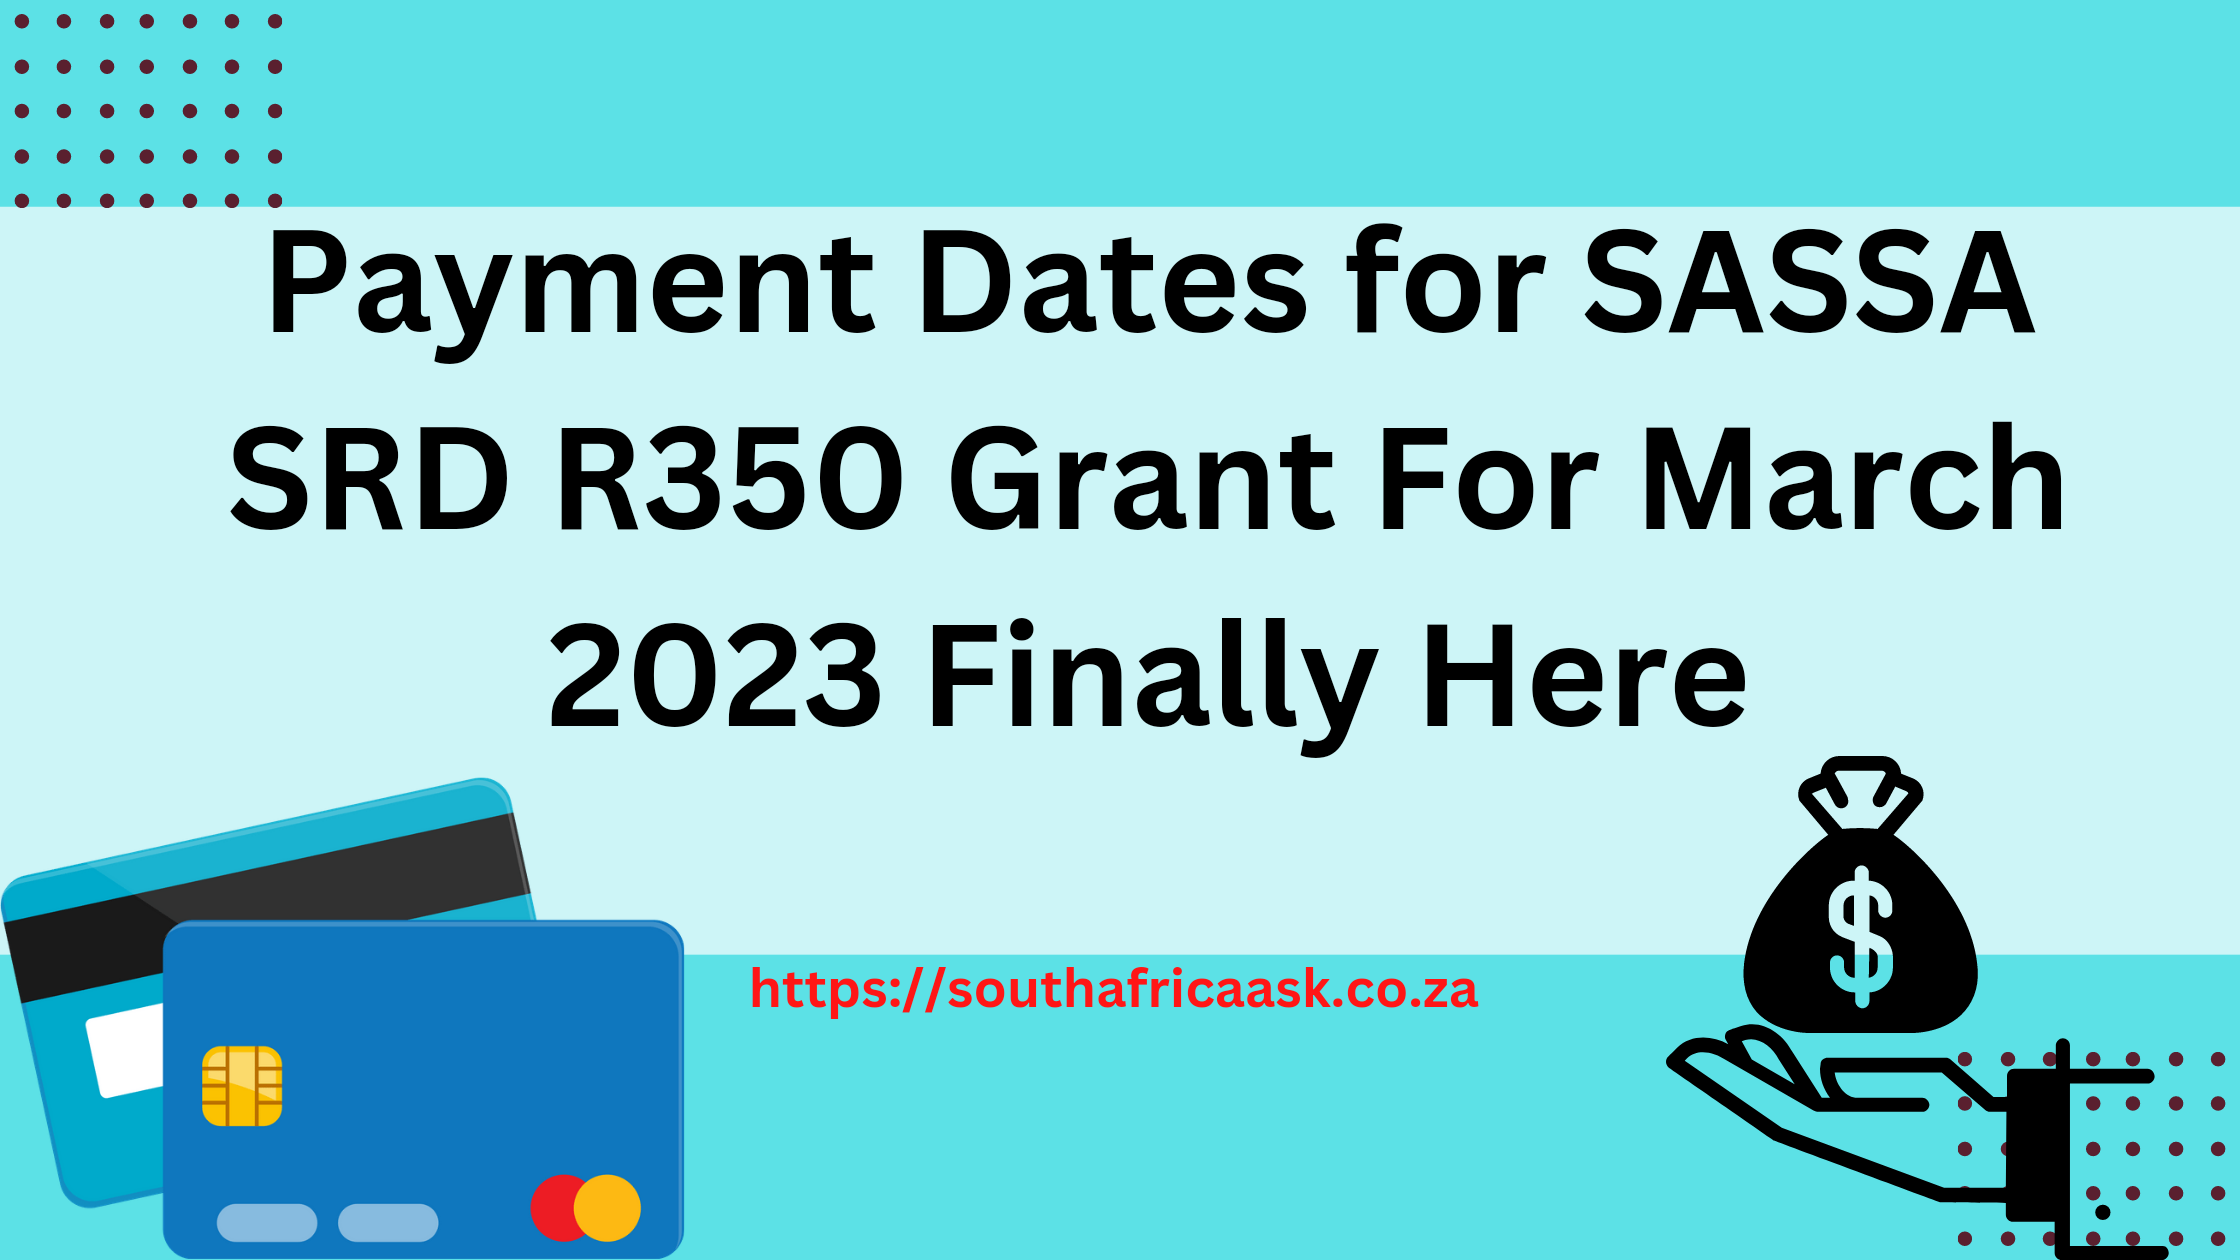 Payment Dates for SASSA SRD R350 Grant For March 2023 Finally Here